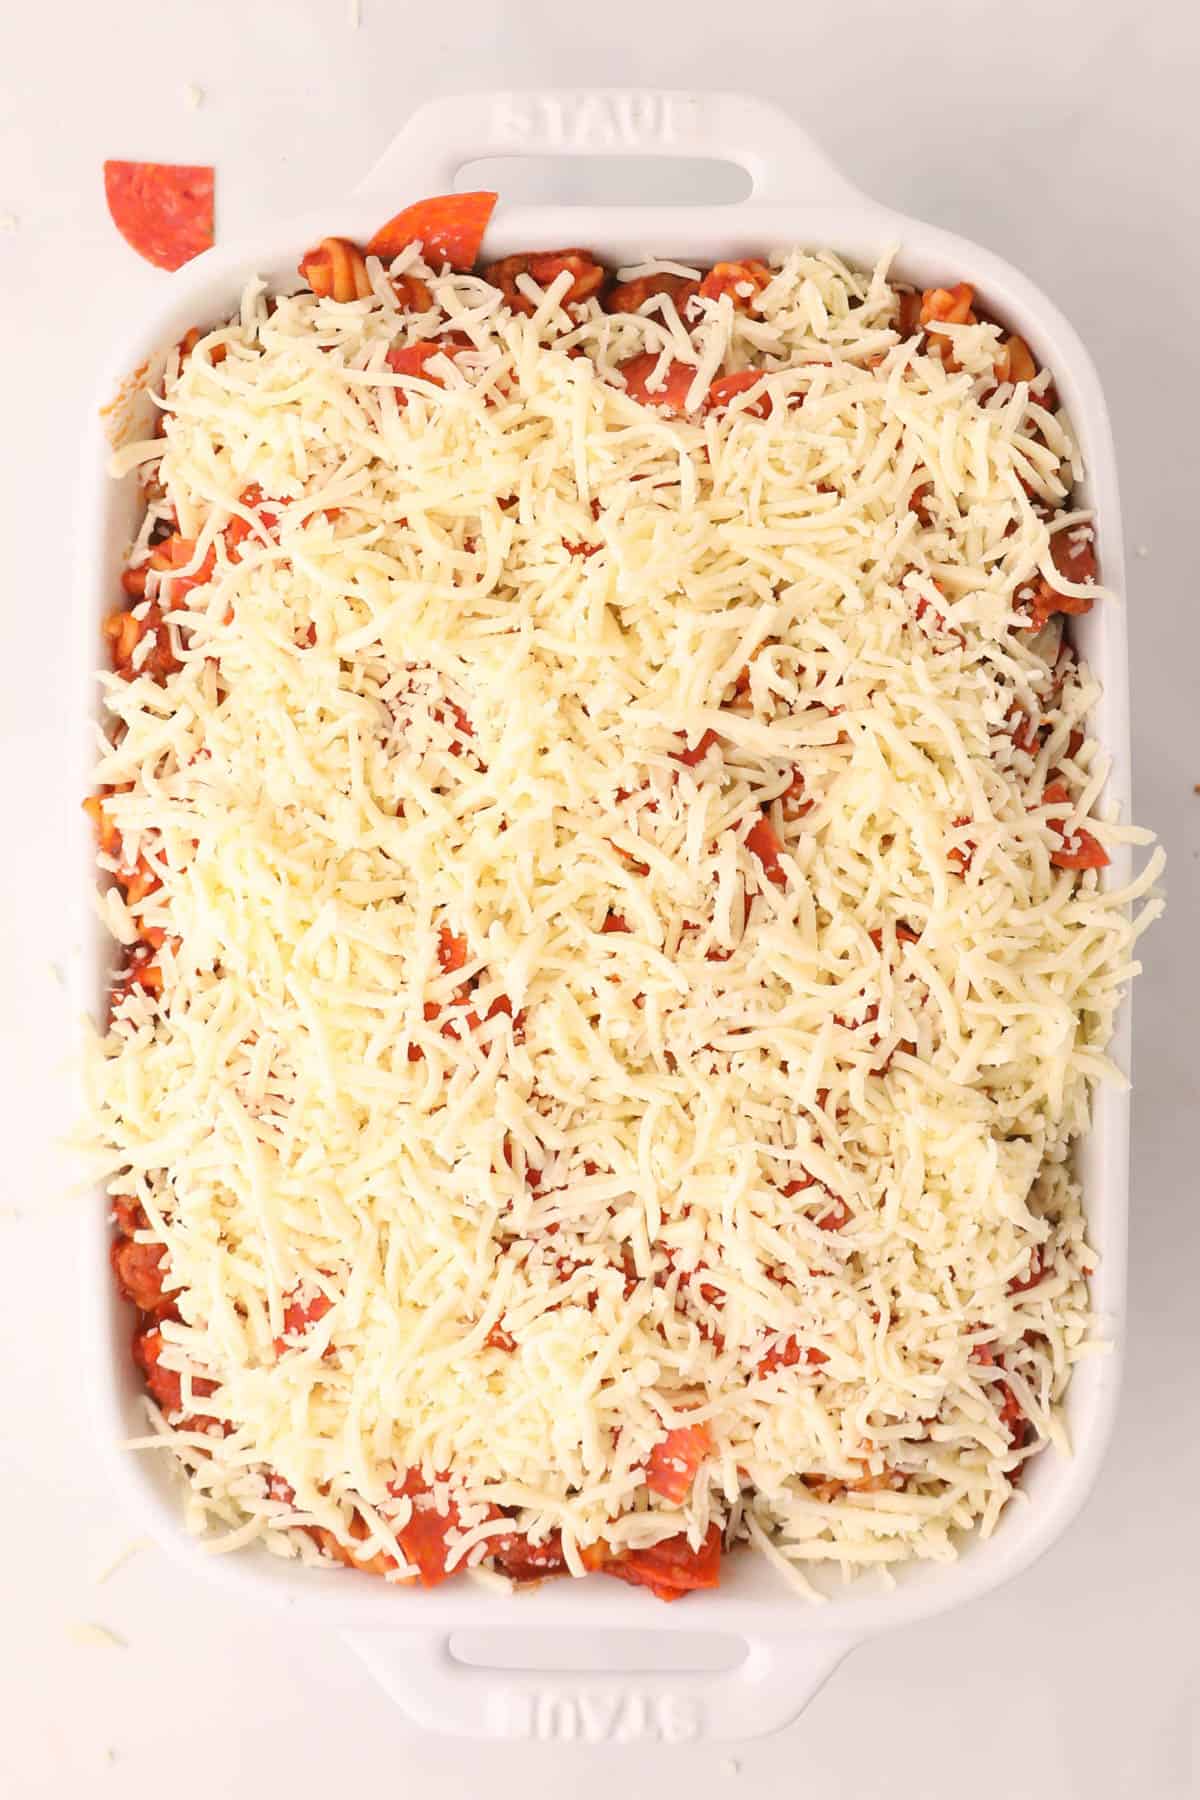 Pizza casserole topped with shredded mozzarella cheese before being baked in the oven.